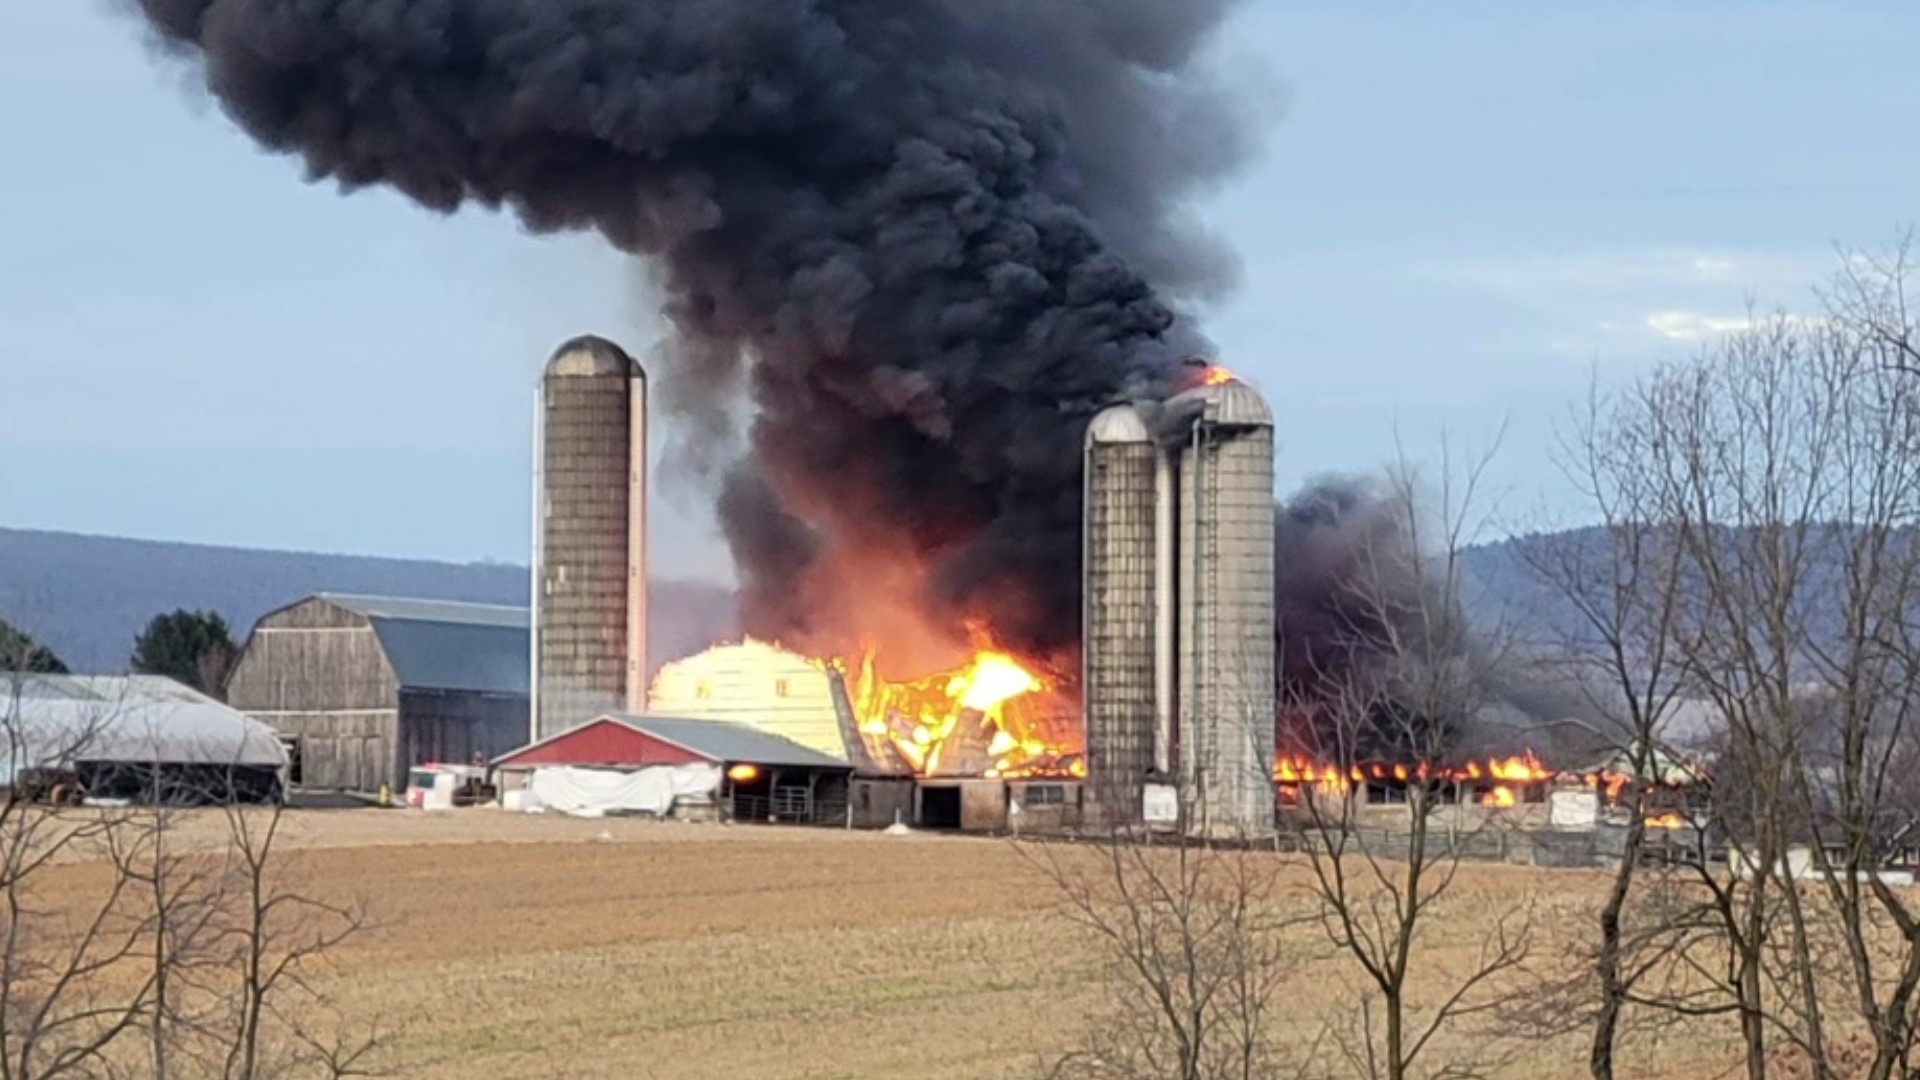 Firefighters from both Lycoming and Clinton Counties were called to the barn in Limestone Township.